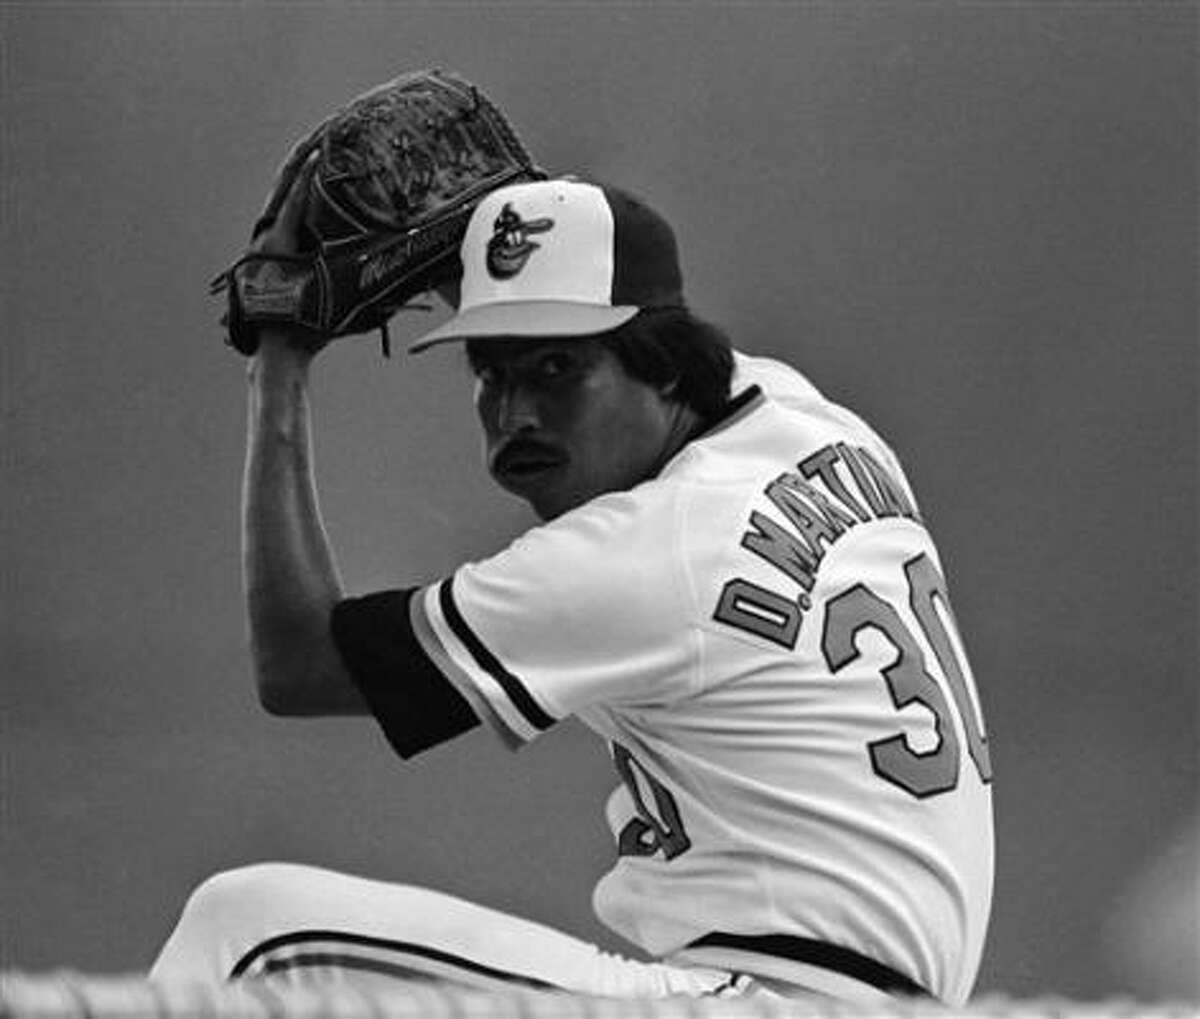 Pitcher Dennis Martinez could still deal with tobacco in his cheek.